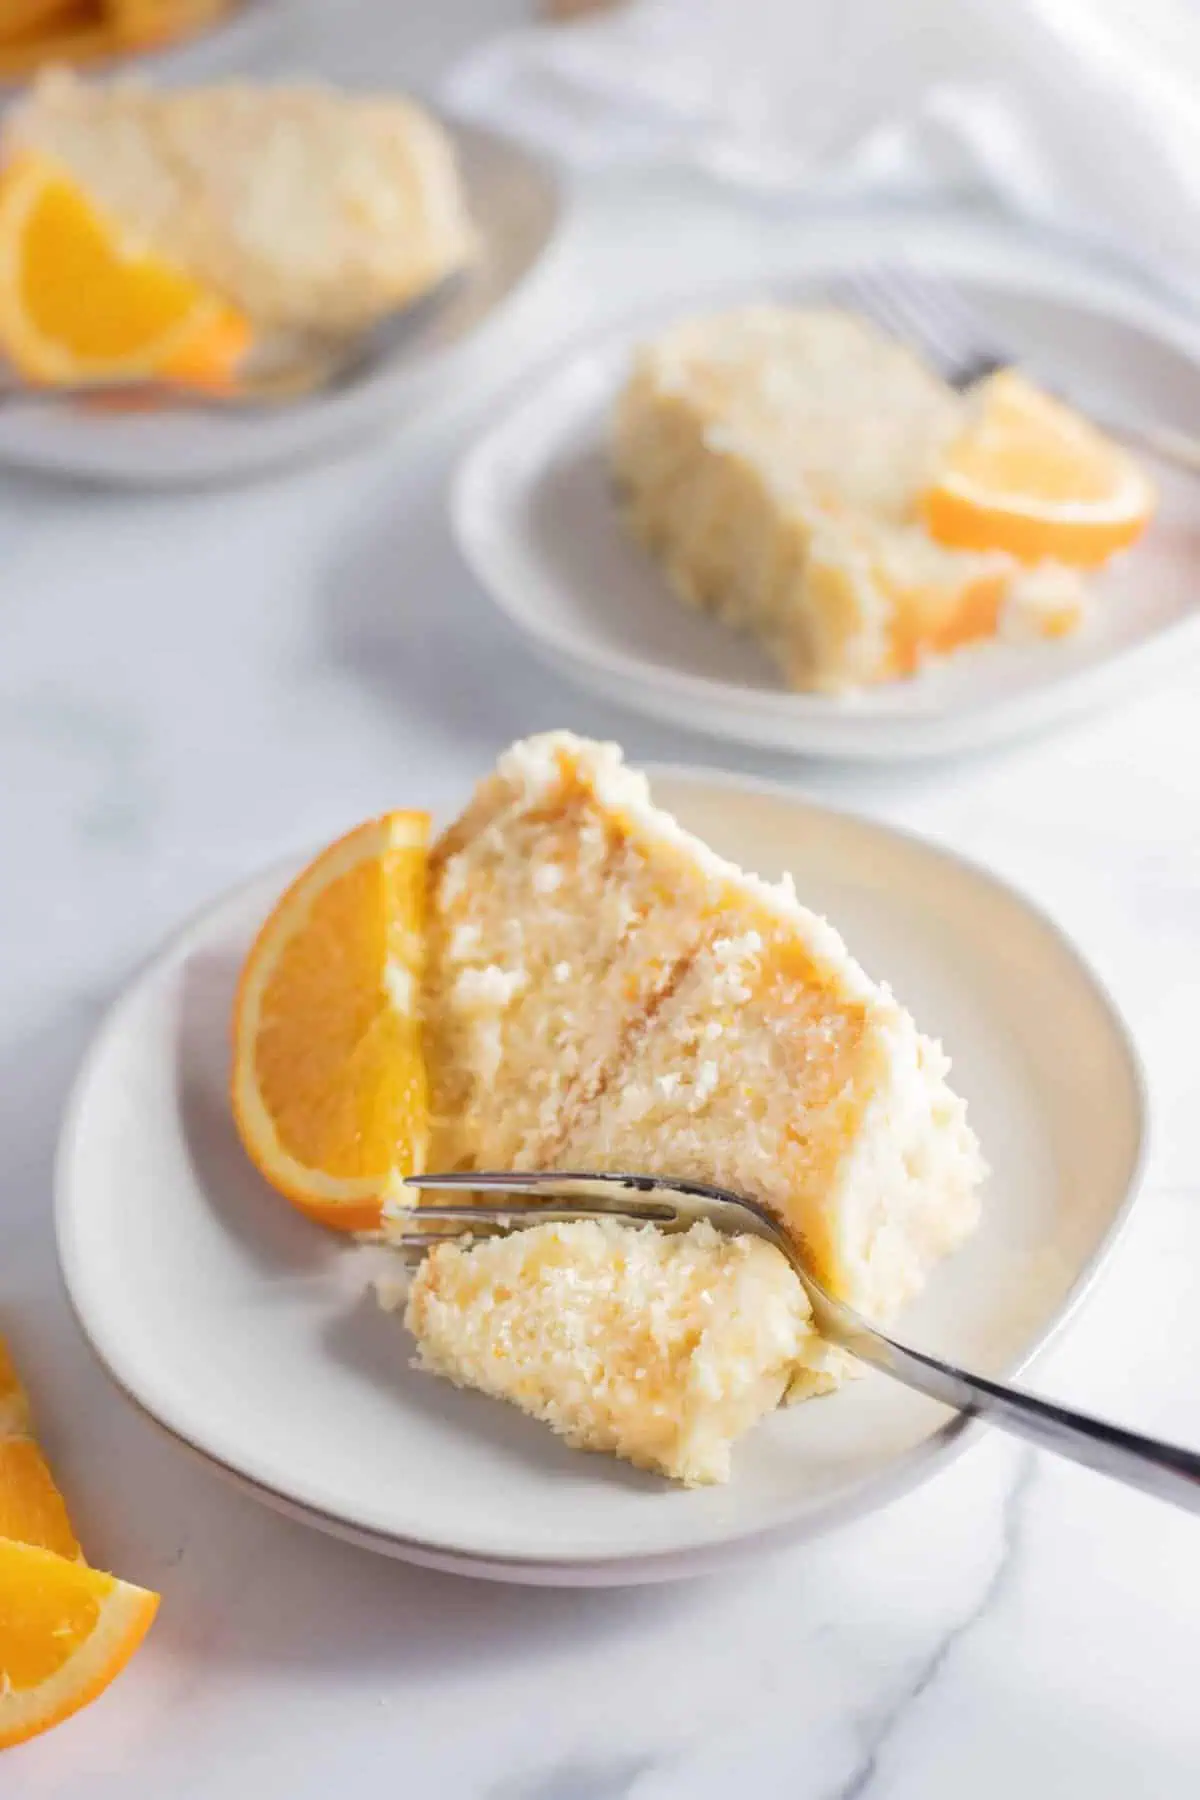 orange creamsicle cake slices on a plate with a fork with an orange slice